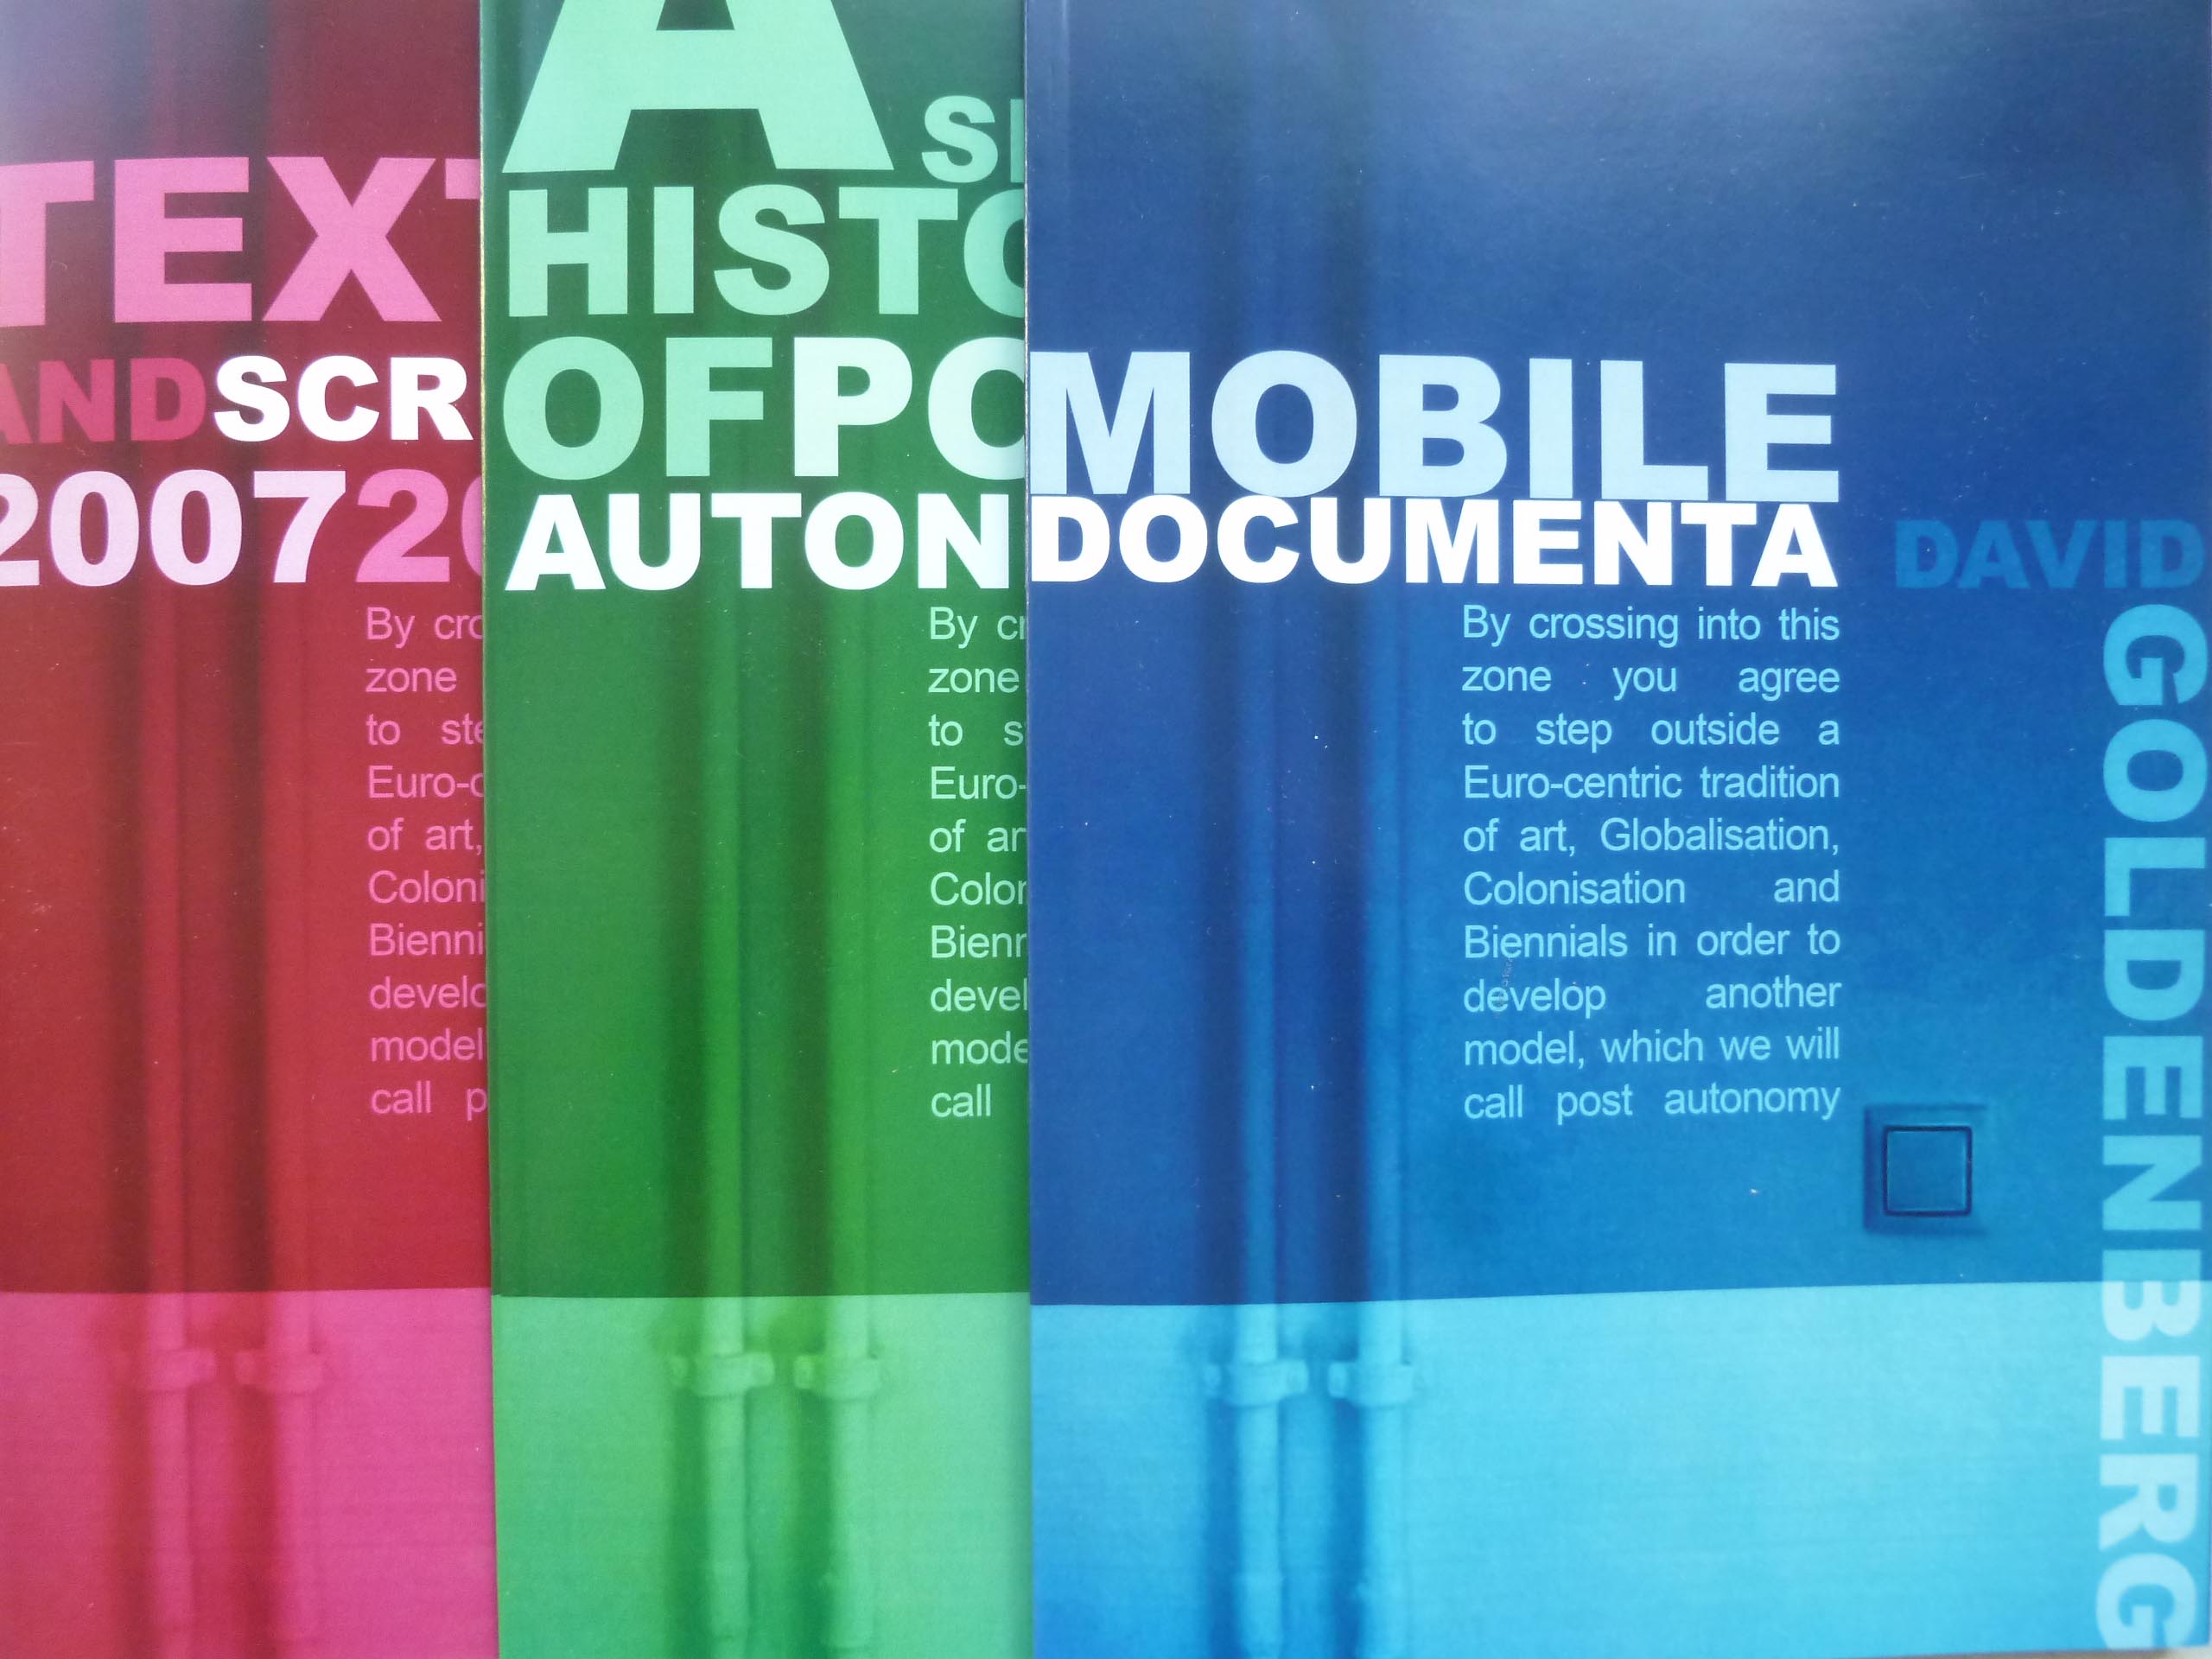  3 booklets - Texts & scripts, A short History of Post Autonomy & Mobile Documenta 1,2 & 3